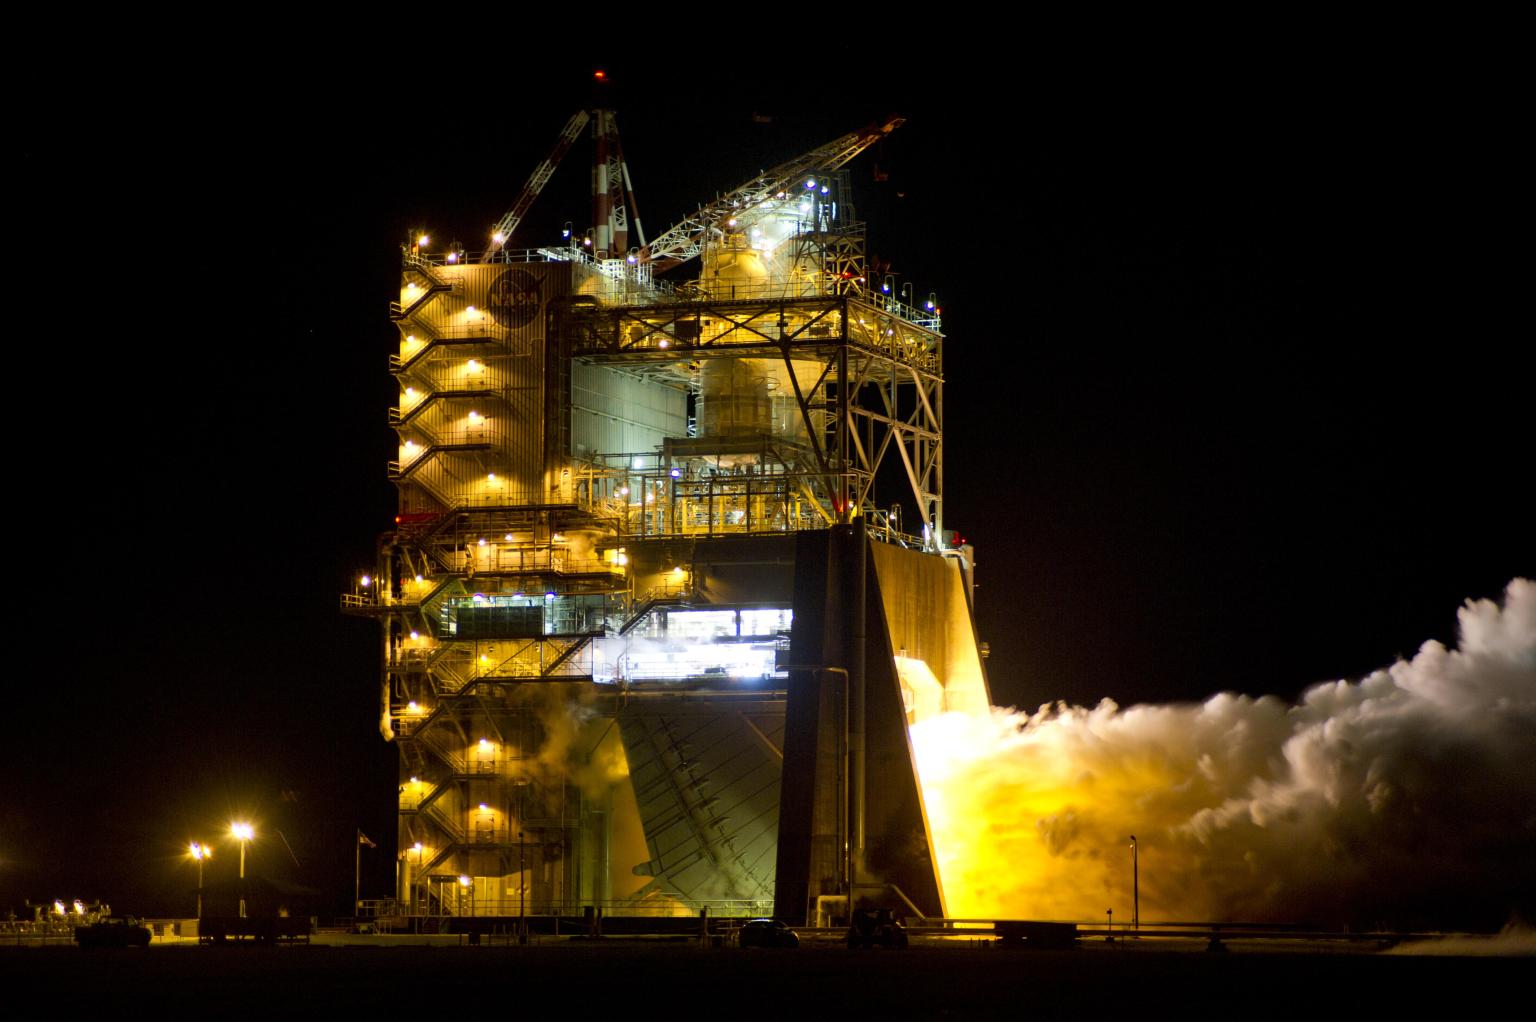 a vapor cloud appears to glow during night engine test on the A-1 Test Stand